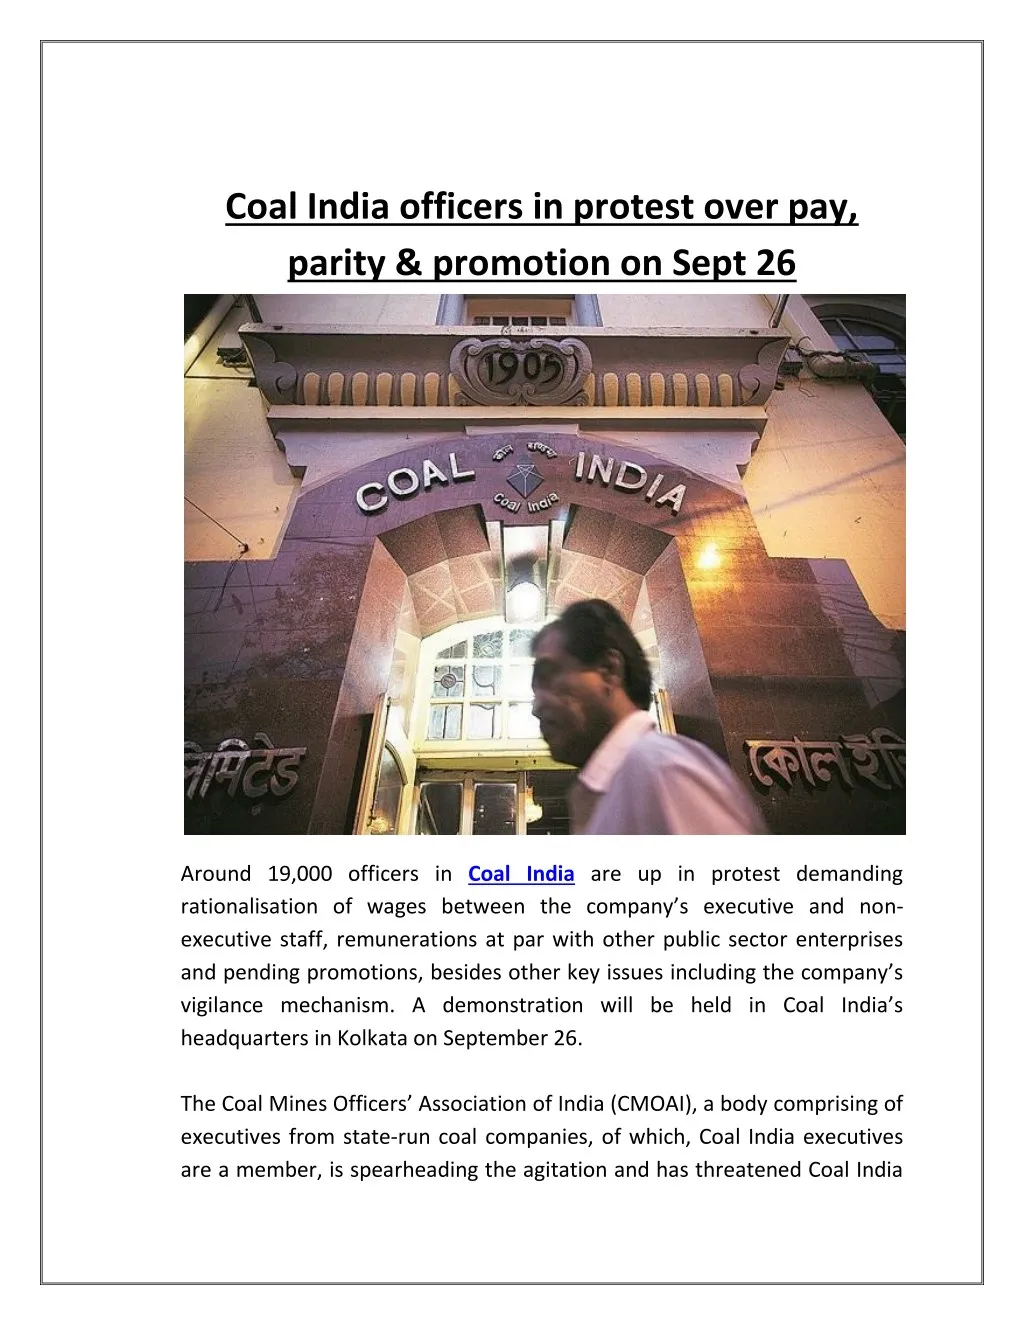 coal india officers in protest over pay parity